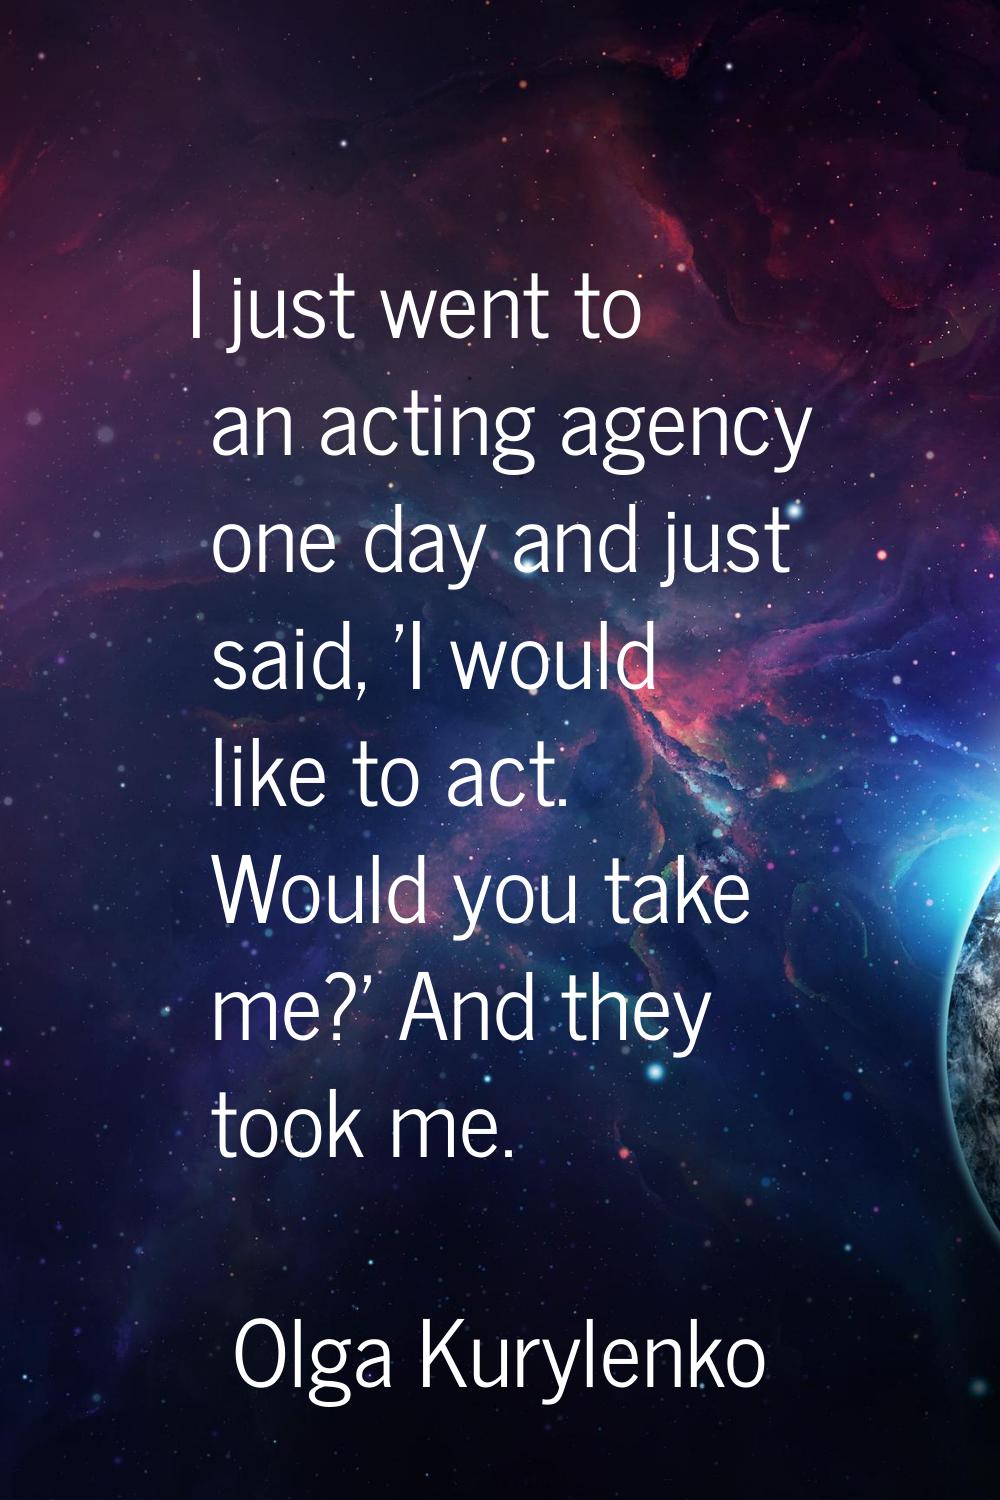 I just went to an acting agency one day and just said, 'I would like to act. Would you take me?' An